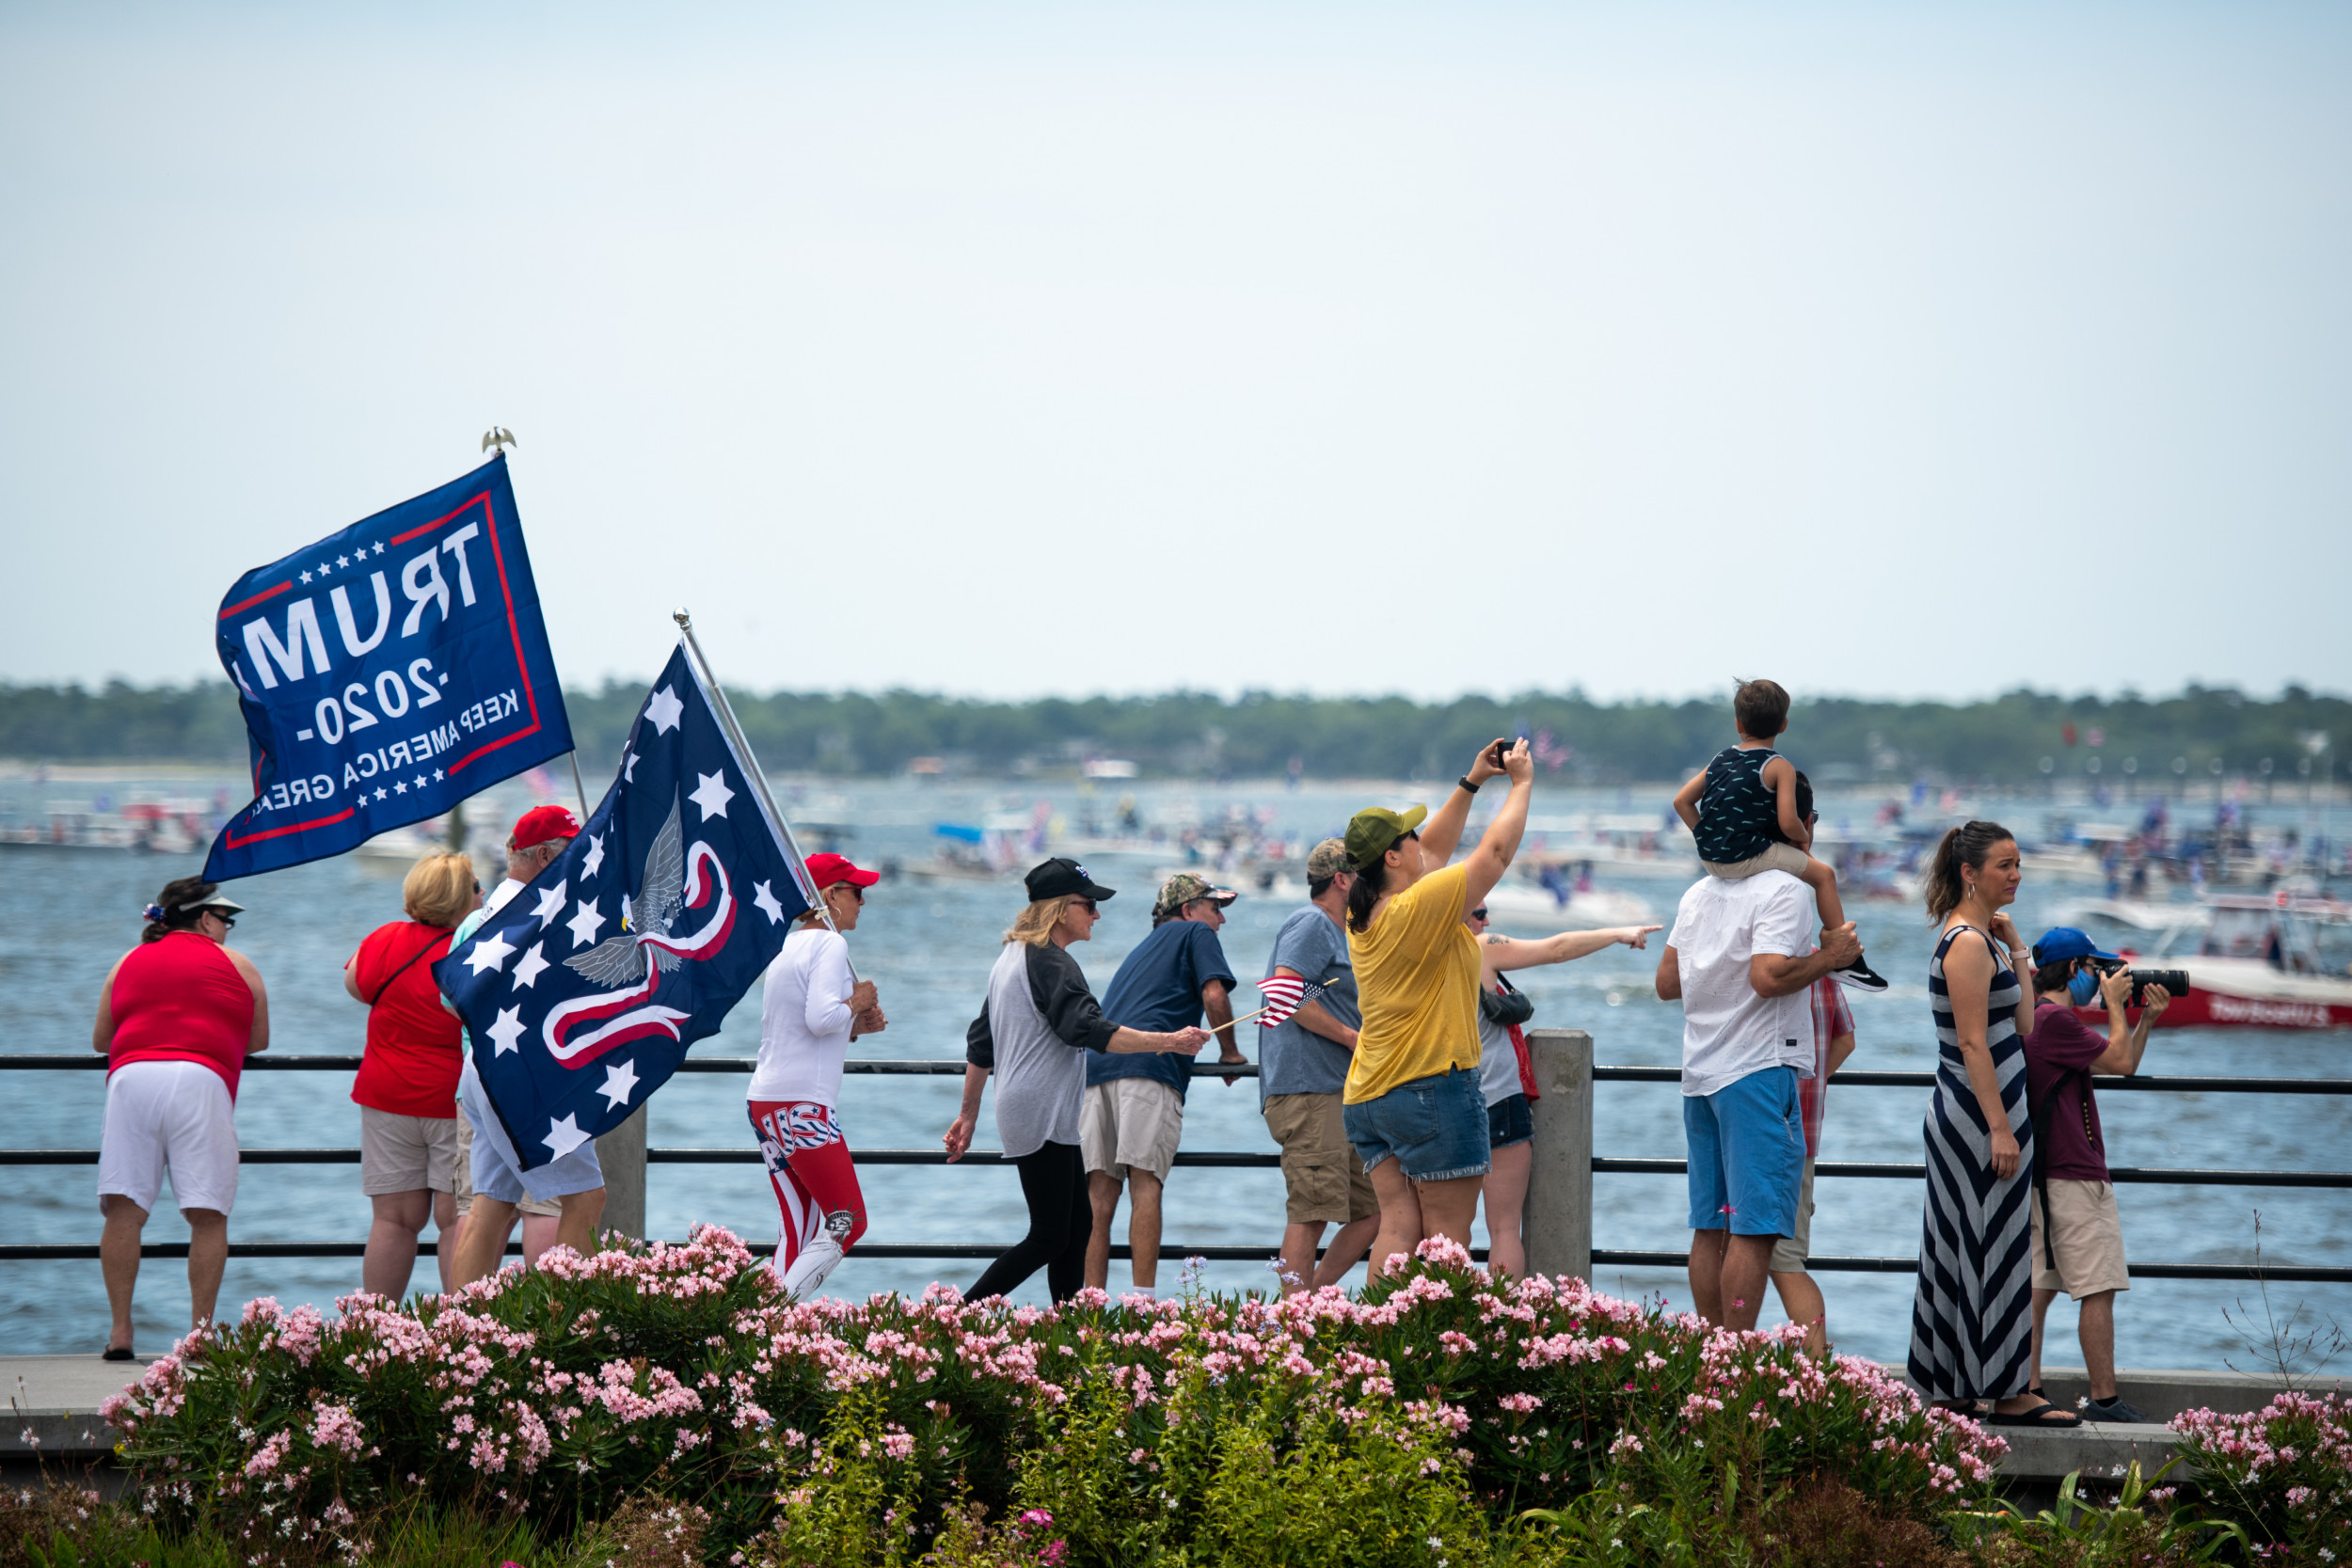 Pro-Trump Boat Parades Over Labor Day Weekend to Feature Thousands of Boats Amid COVID-19 Pandemic thumbnail